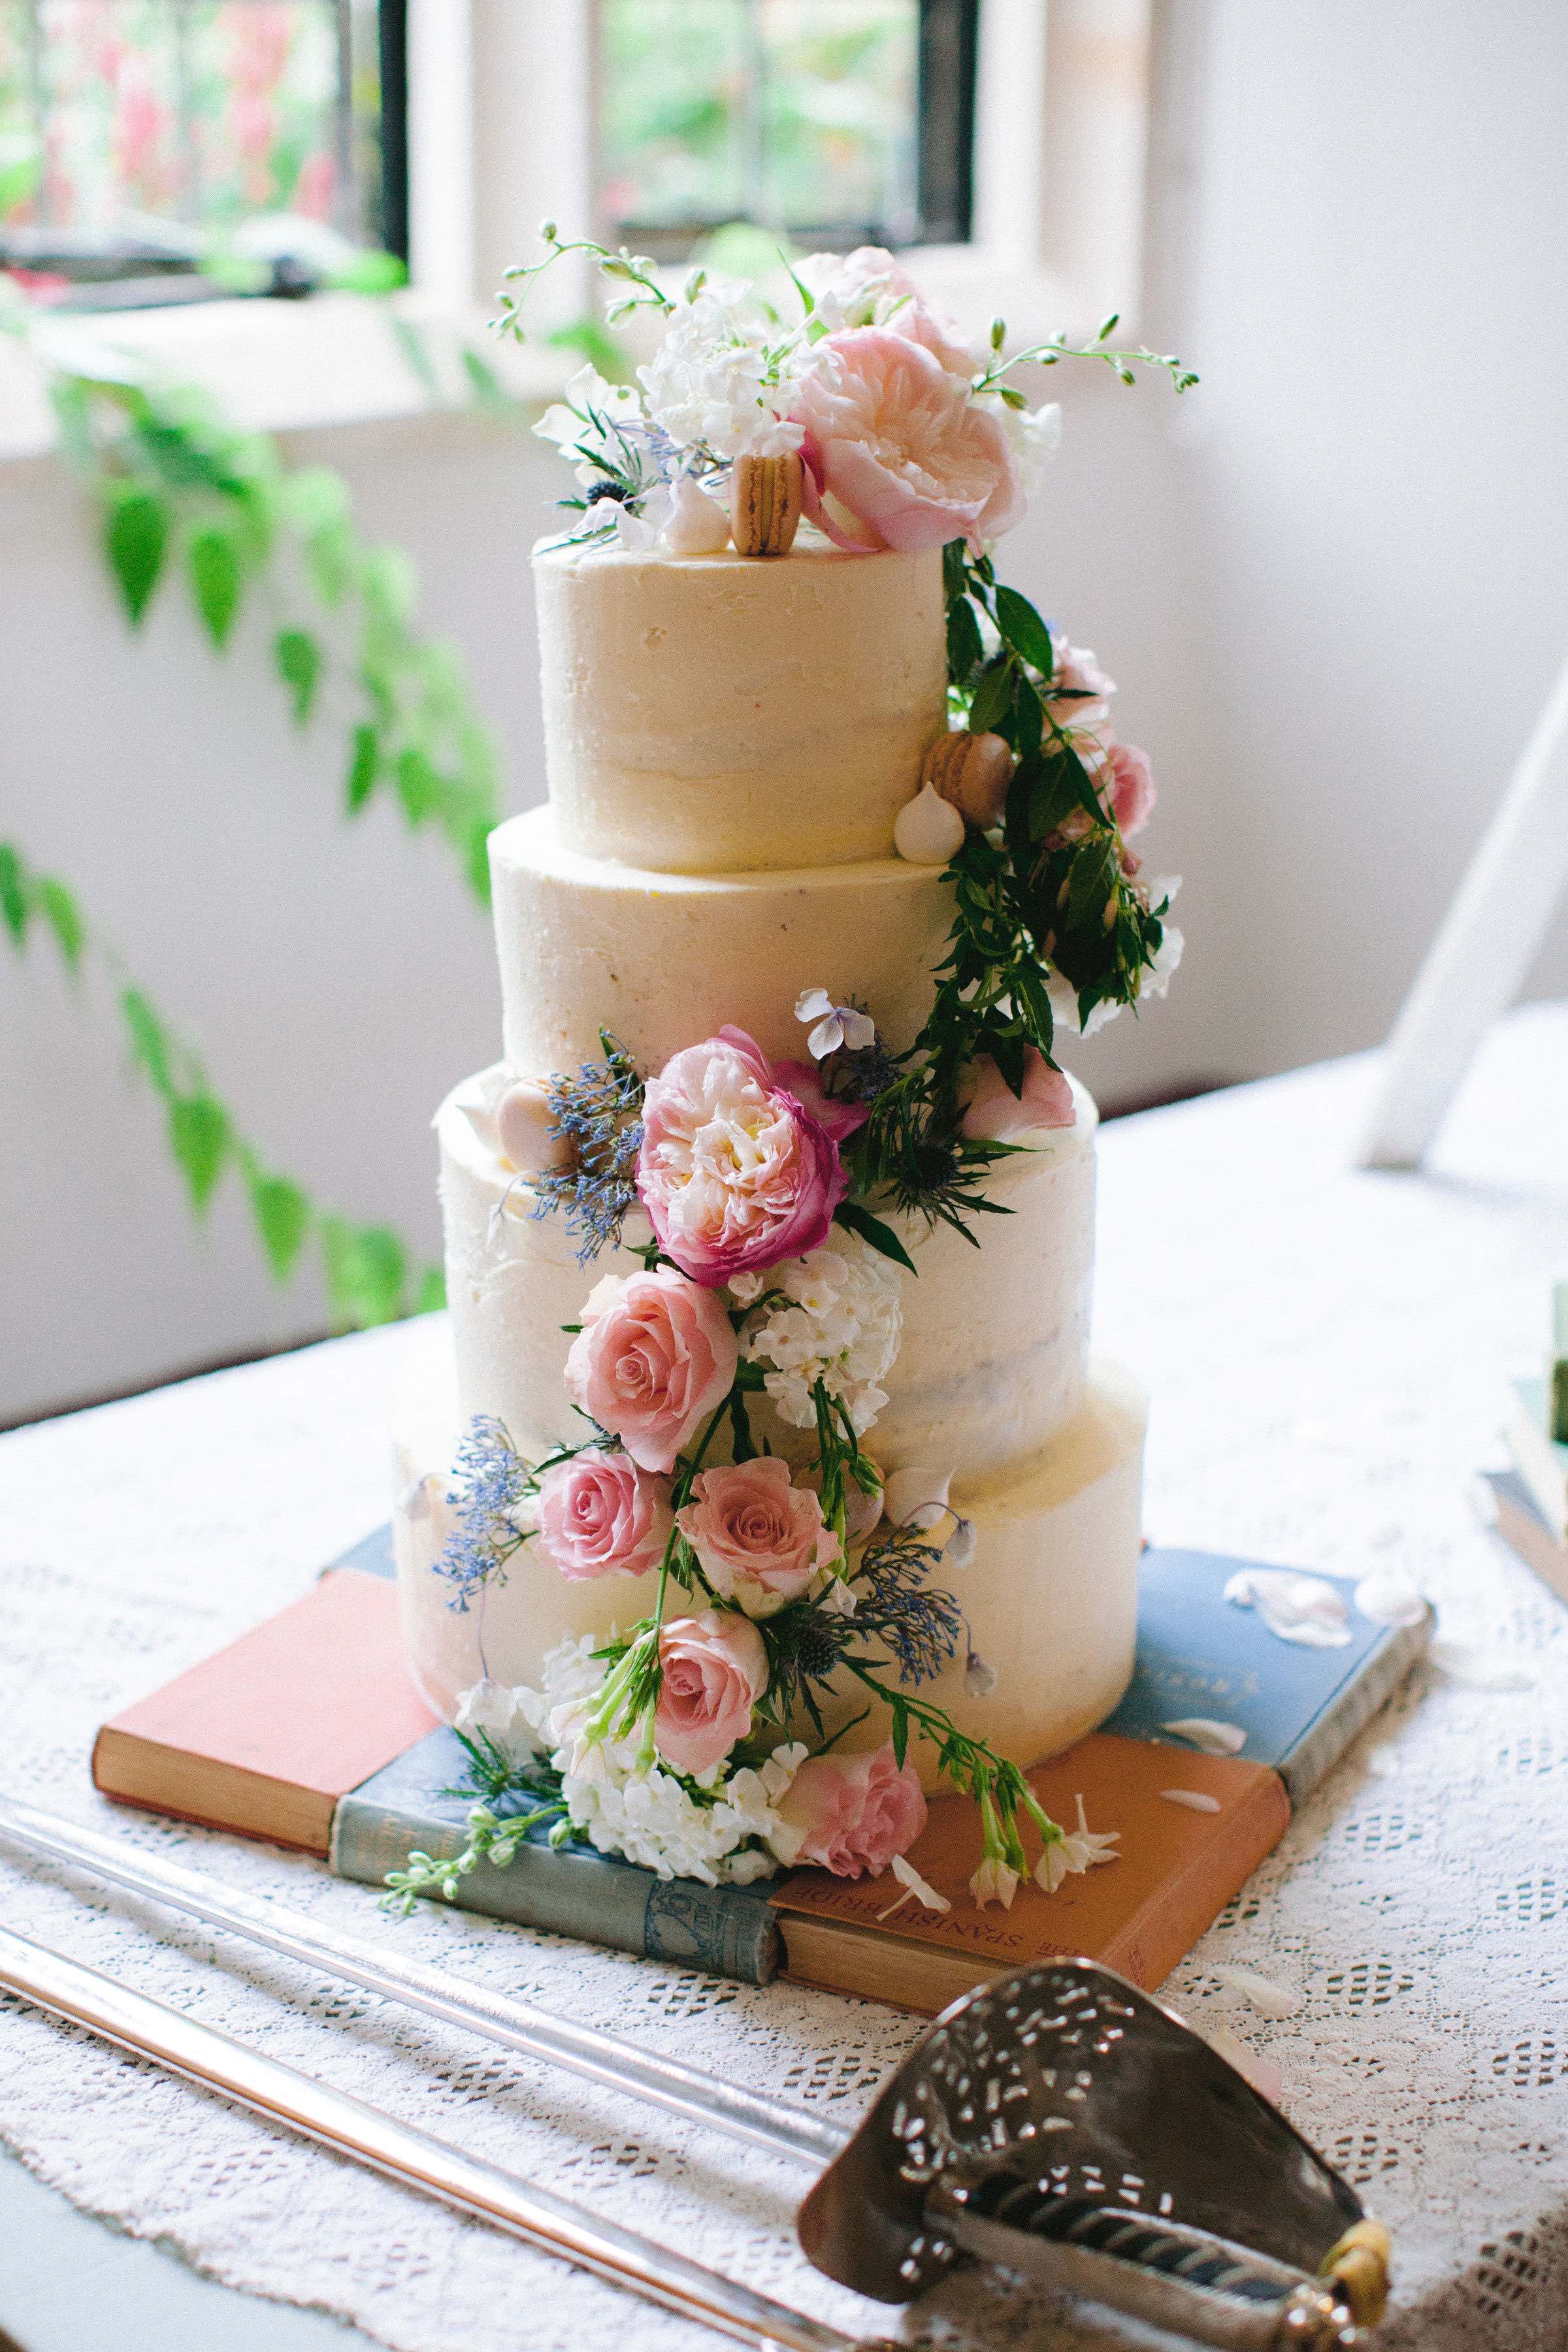 Quintessential English Summer wedding cake decorated with fresh garden flowers. Photo by Camila Arnhold.